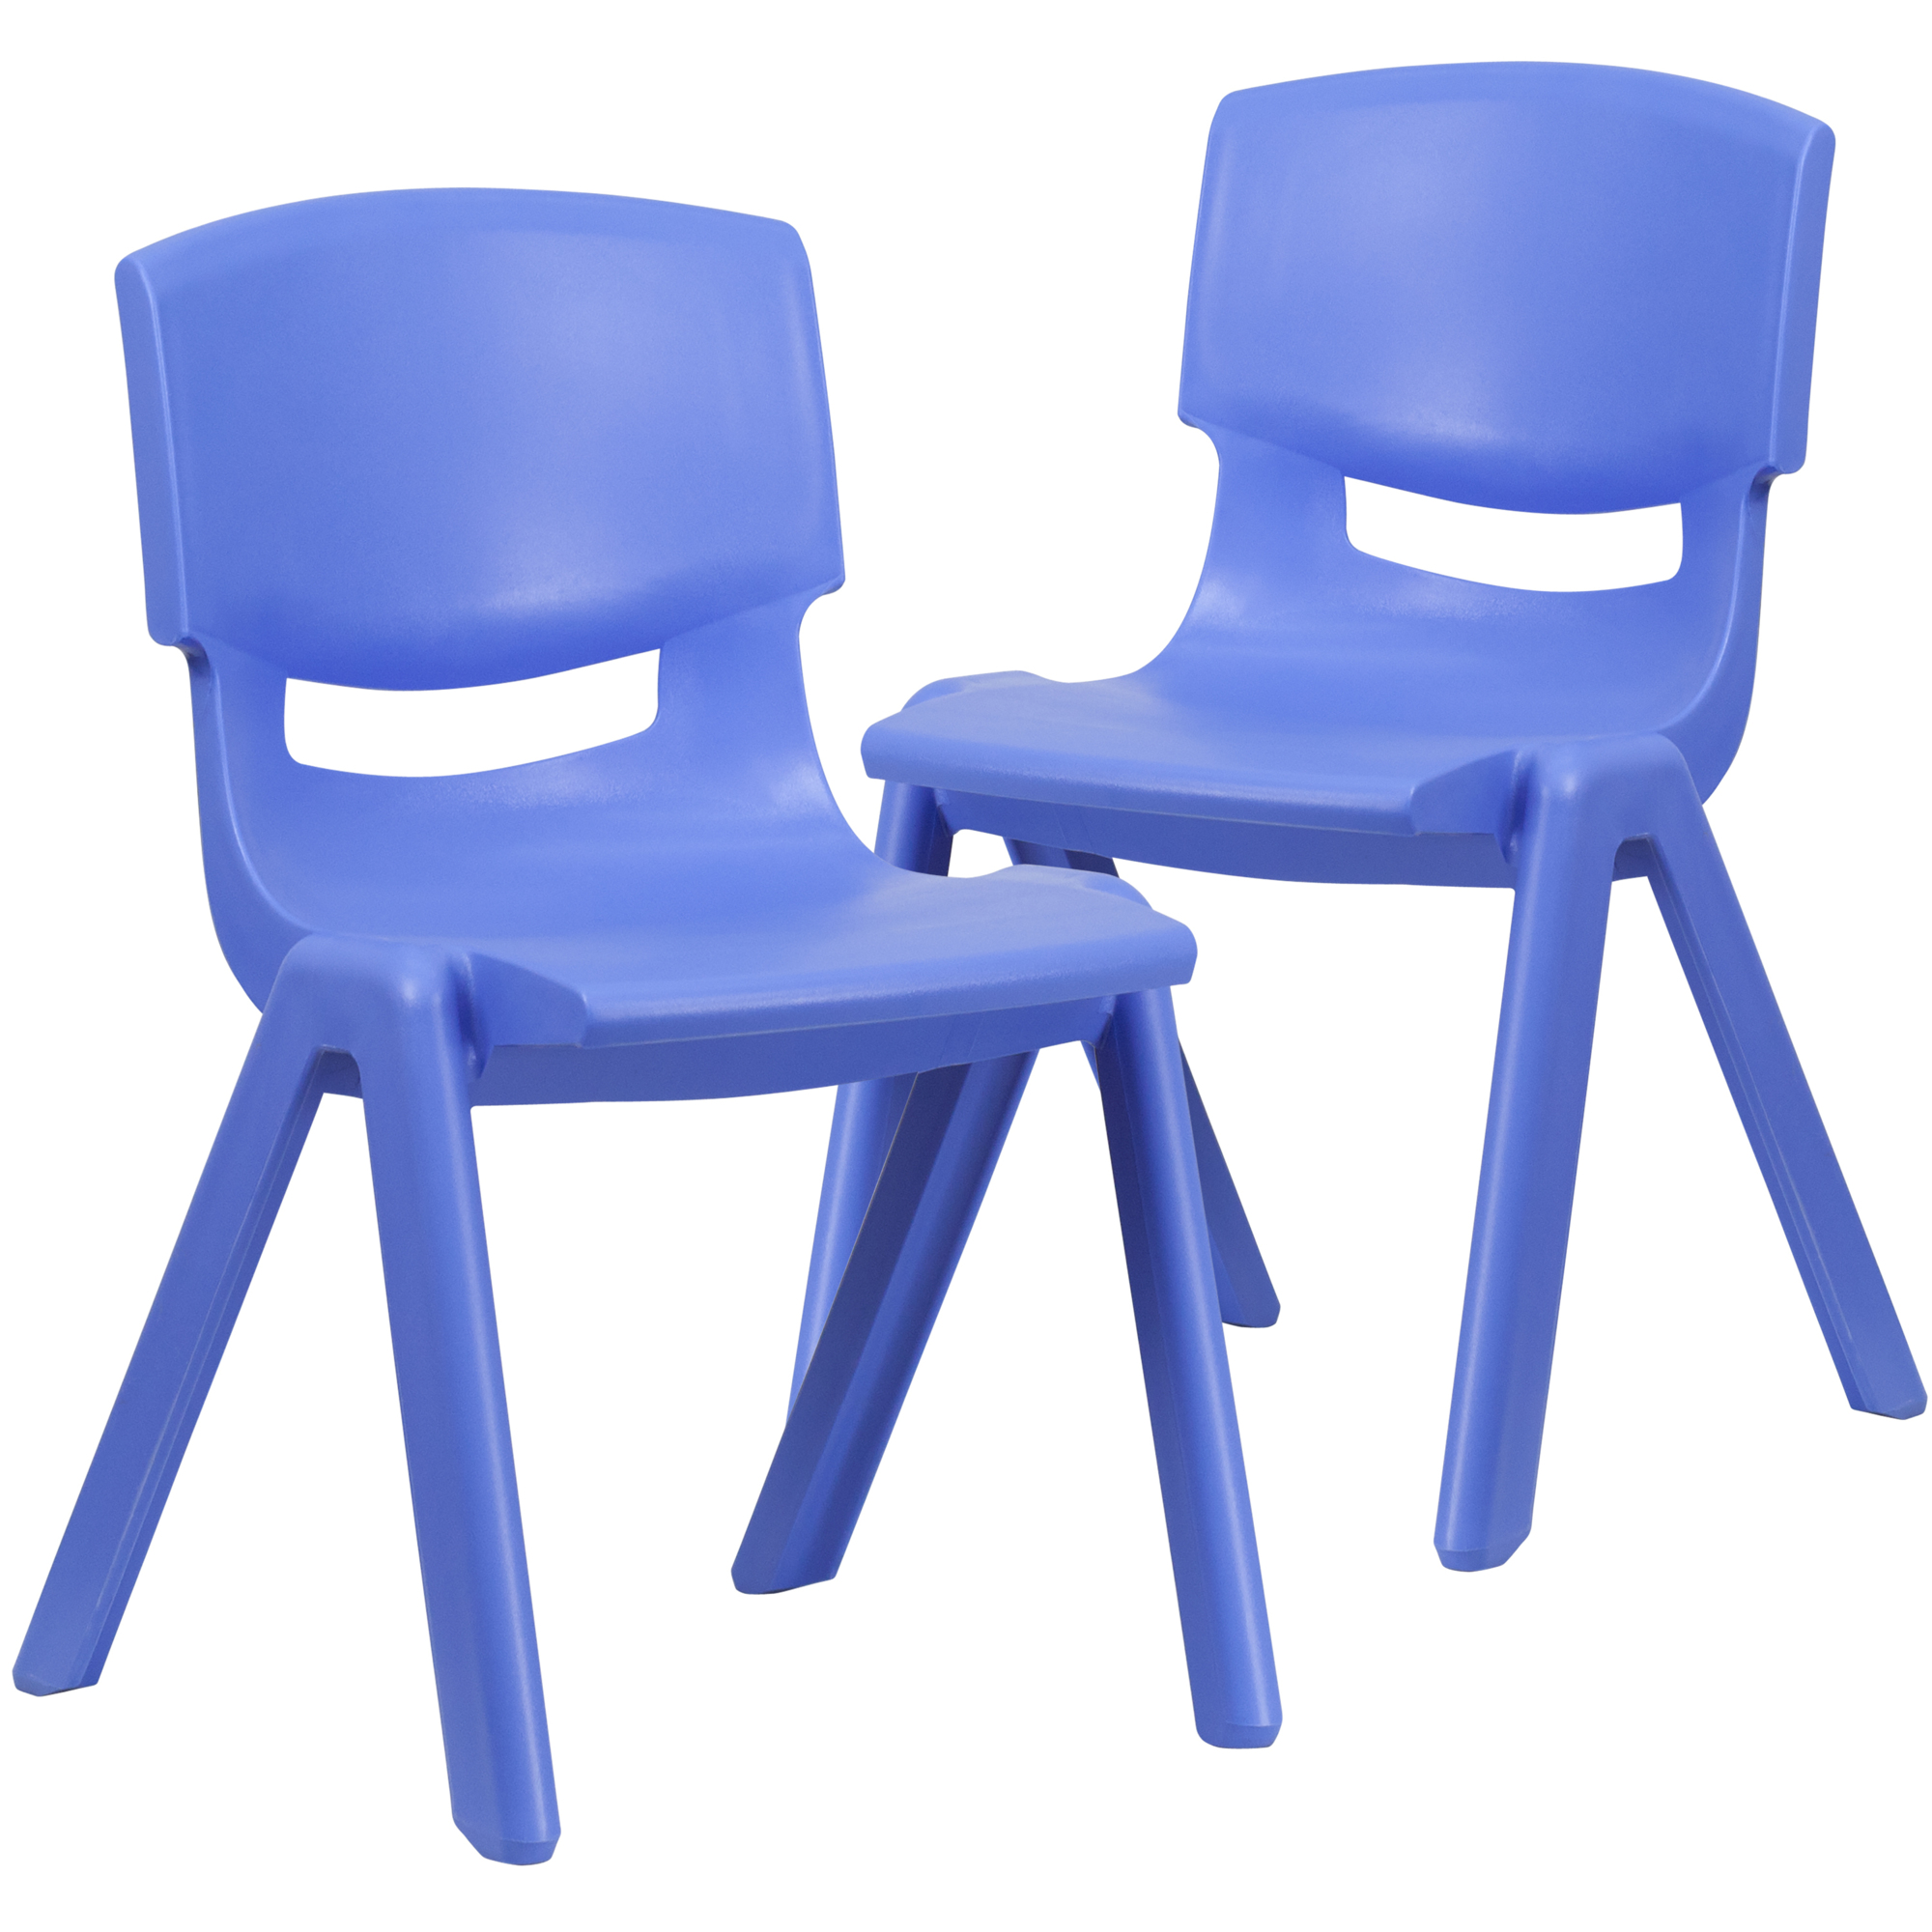 Flash Furniture, 2 Pack Blue Plastic Stack School Chair-15.5Inch H Seat, Primary Color Blue, Included (qty.) 2, Model 2YUYCX005BLUE